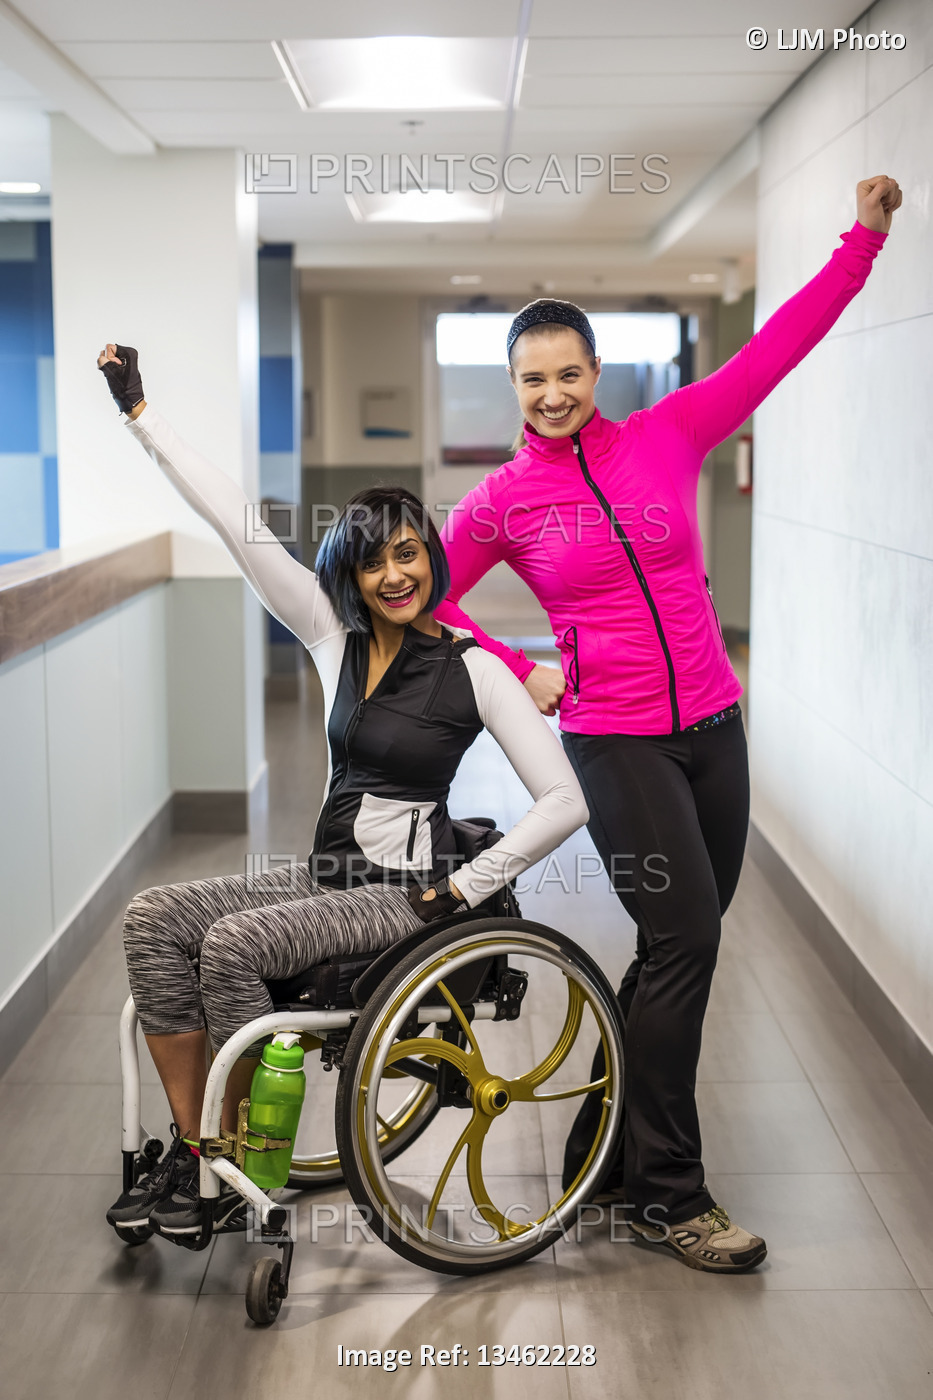 A paraplegic woman and her trainer do a celebratory pose for the camera while ...